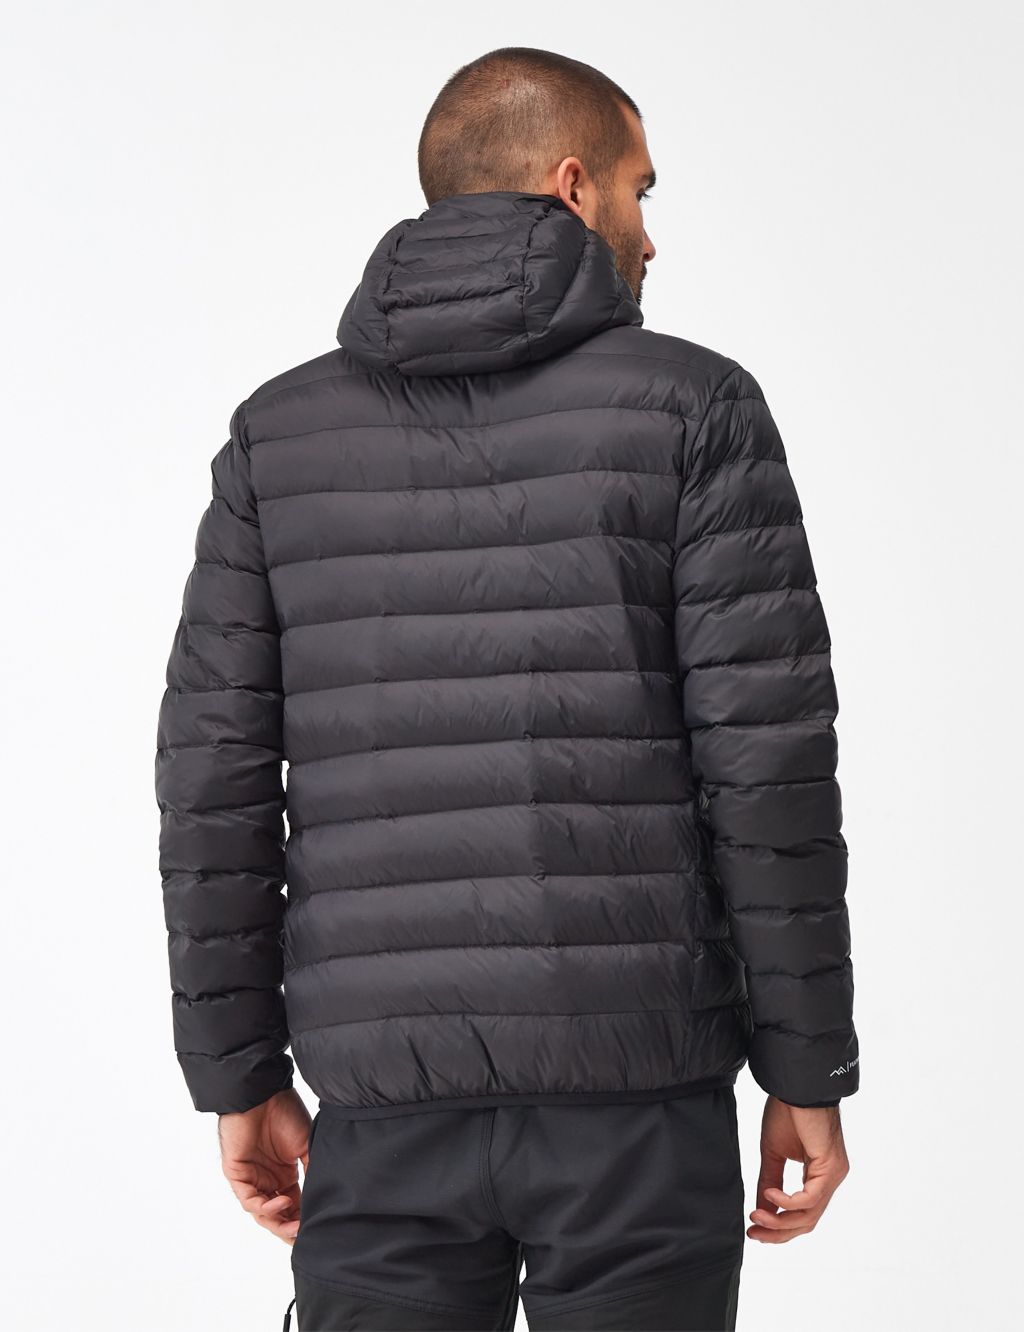 Marizion Water-Repellent Puffer Jacket image 3